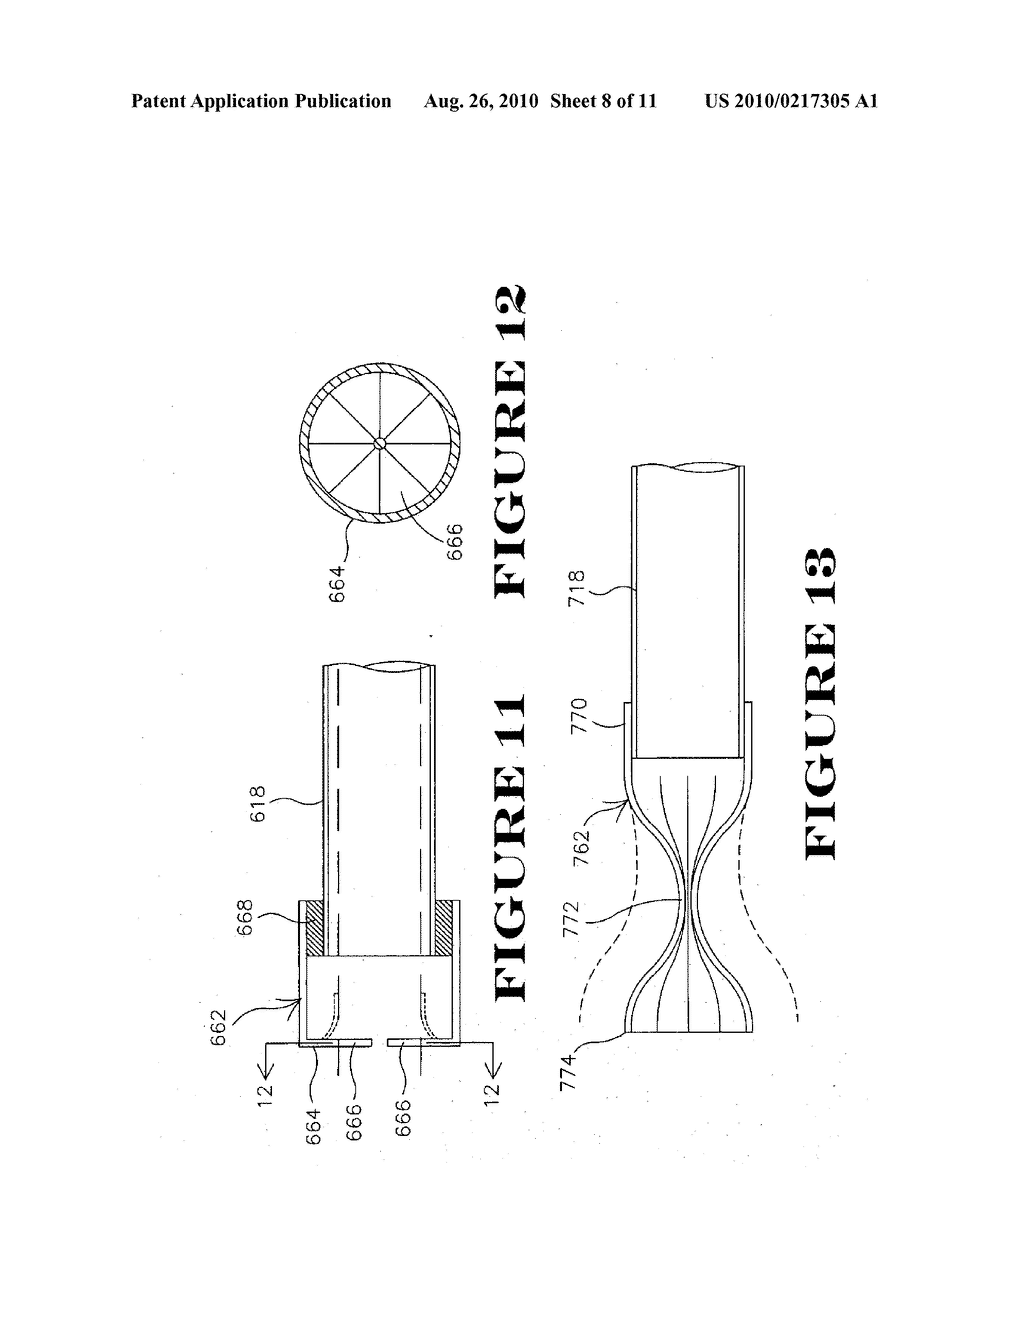 EMBOLIC PROTECTION FILTERING DEVICE THAT CAN BE ADAPTED TO BE ADVANCED OVER A GUIDEWIRE - diagram, schematic, and image 09